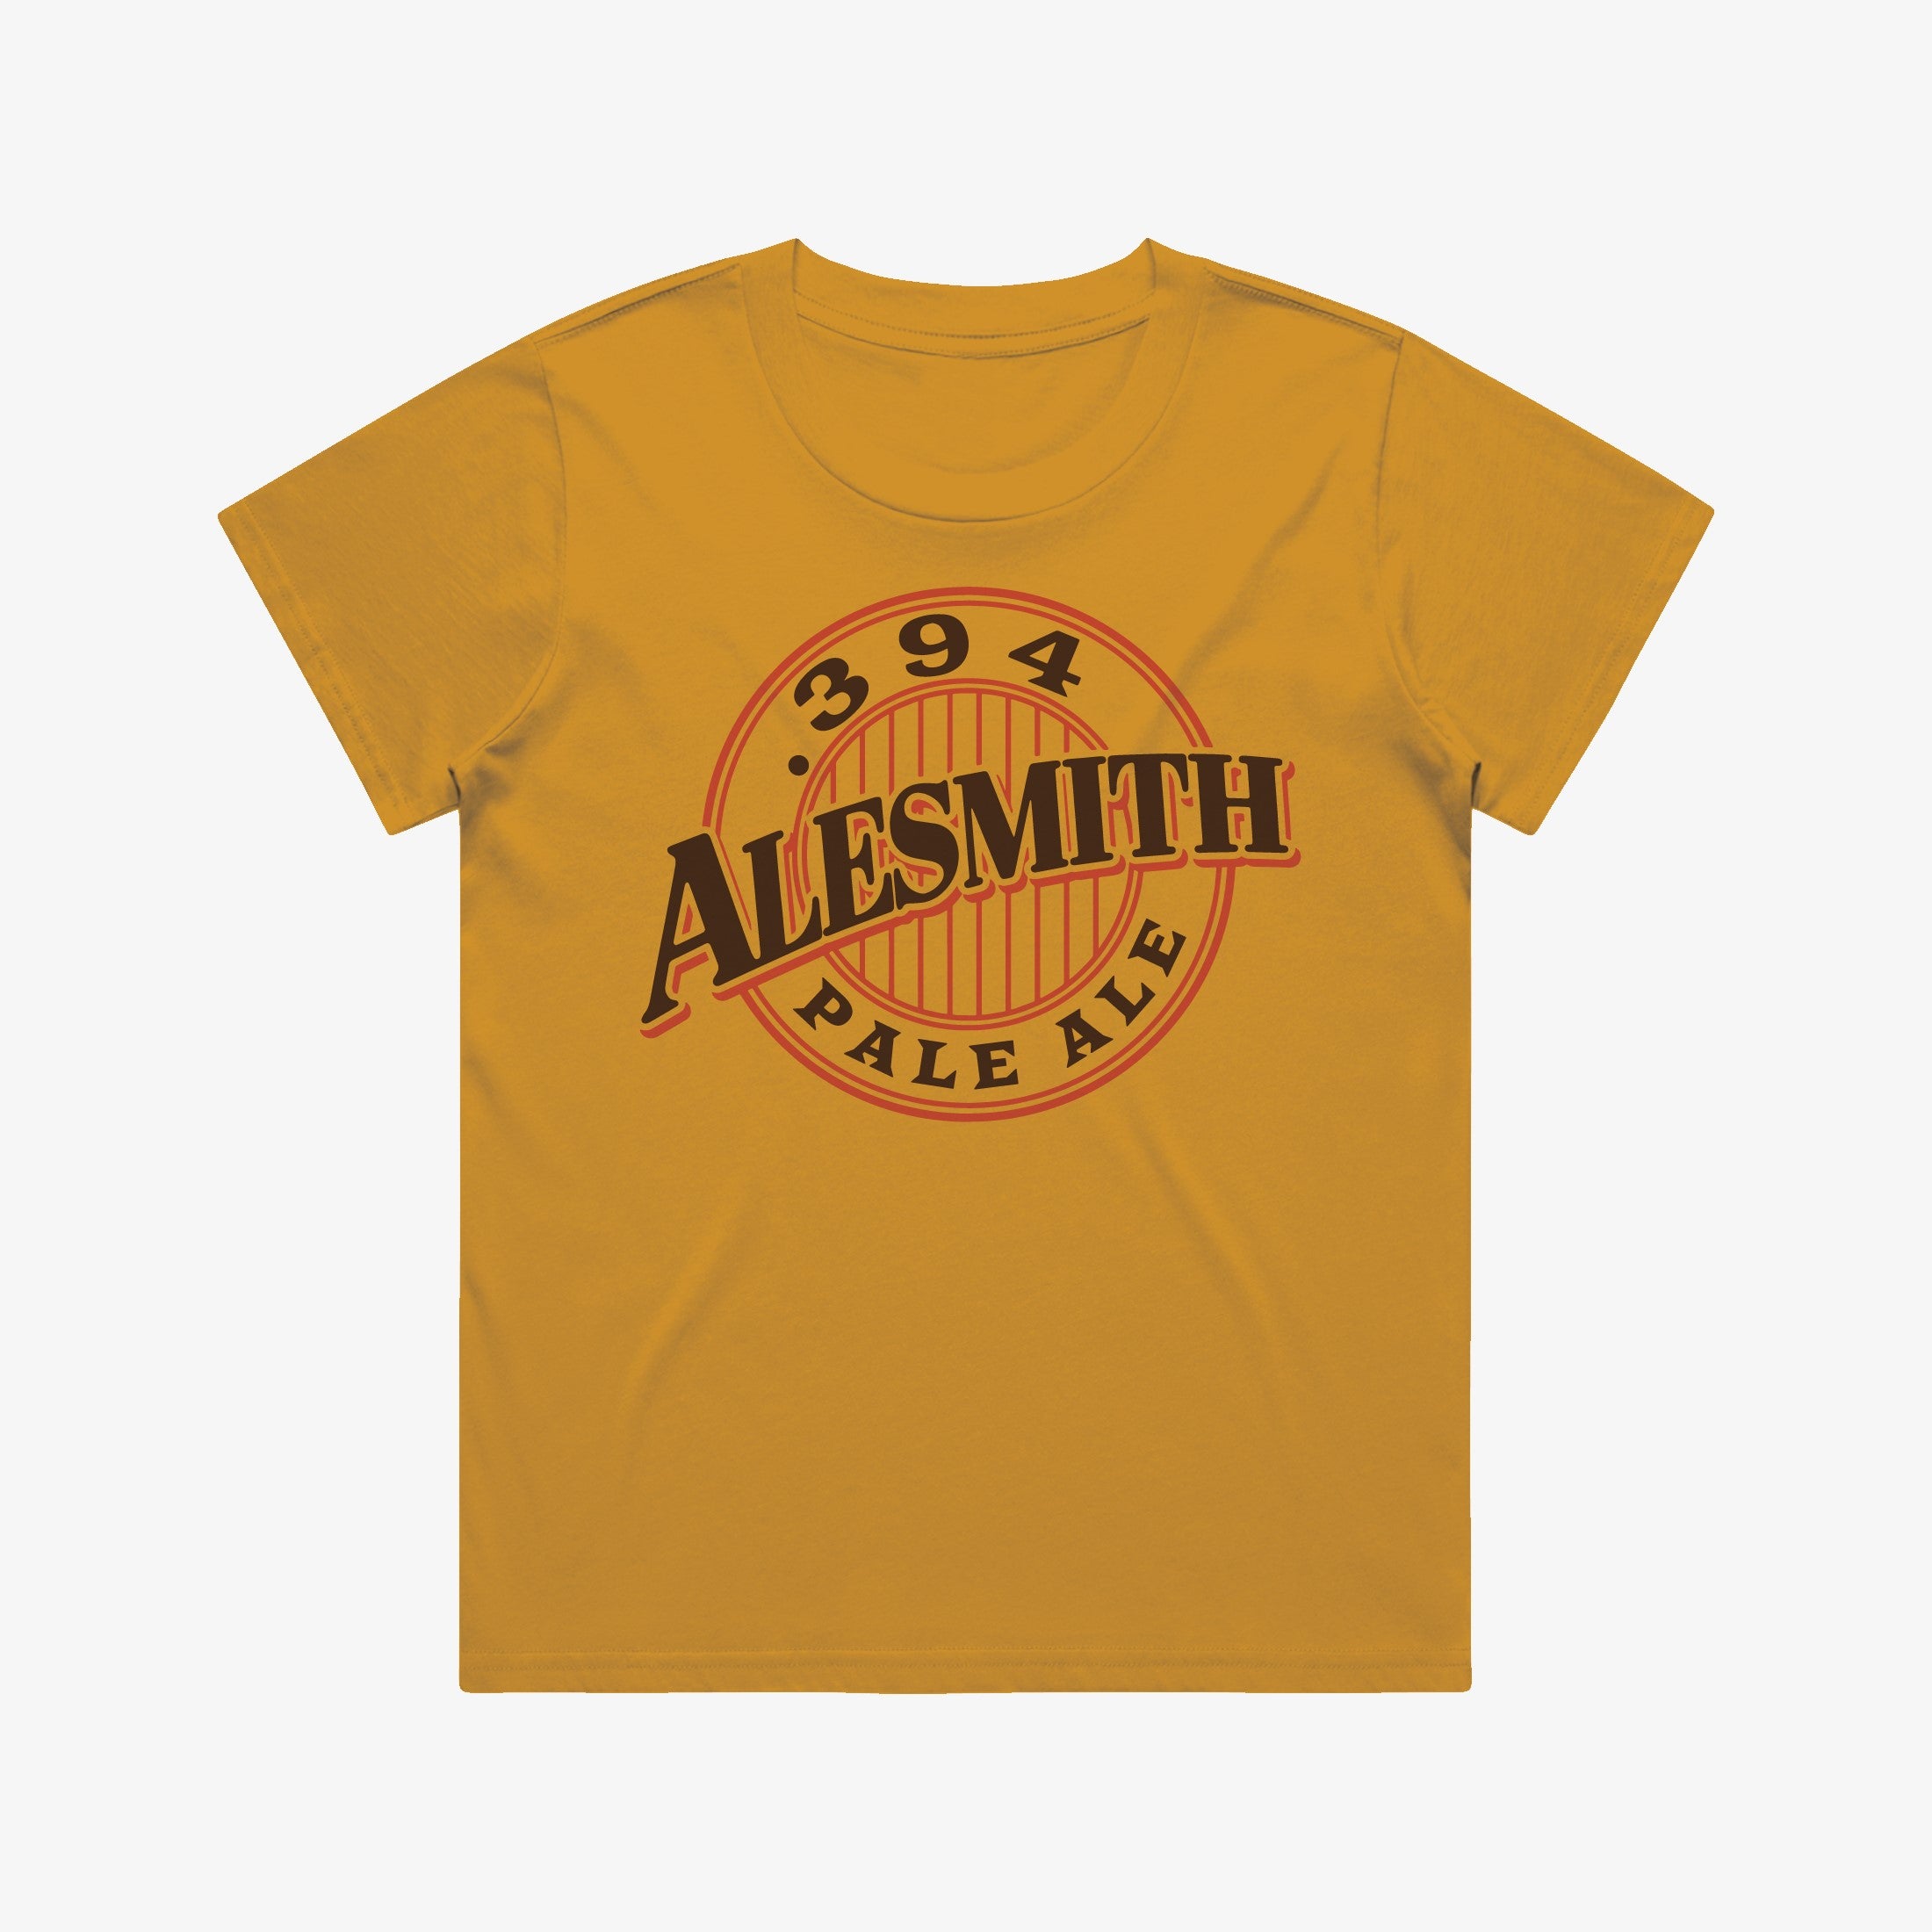 Women's .394 Stamp Tee - Old Gold - AleSmith Brewing Co.